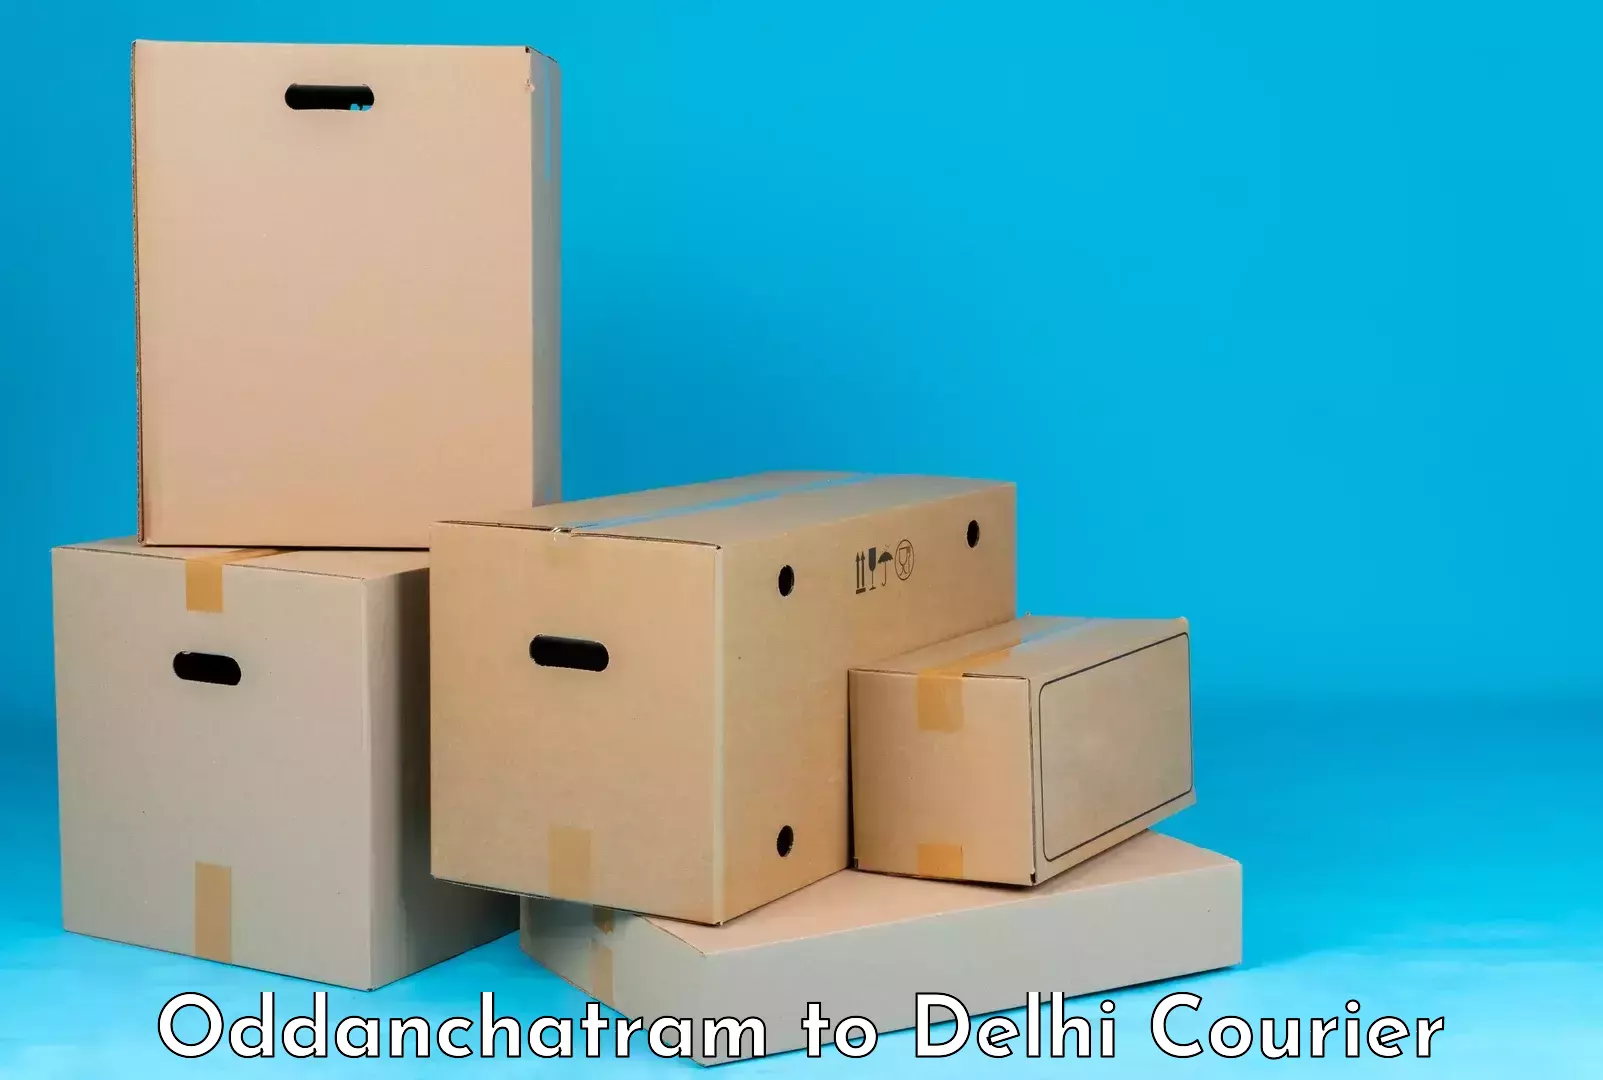 Fast track baggage delivery in Oddanchatram to NCR